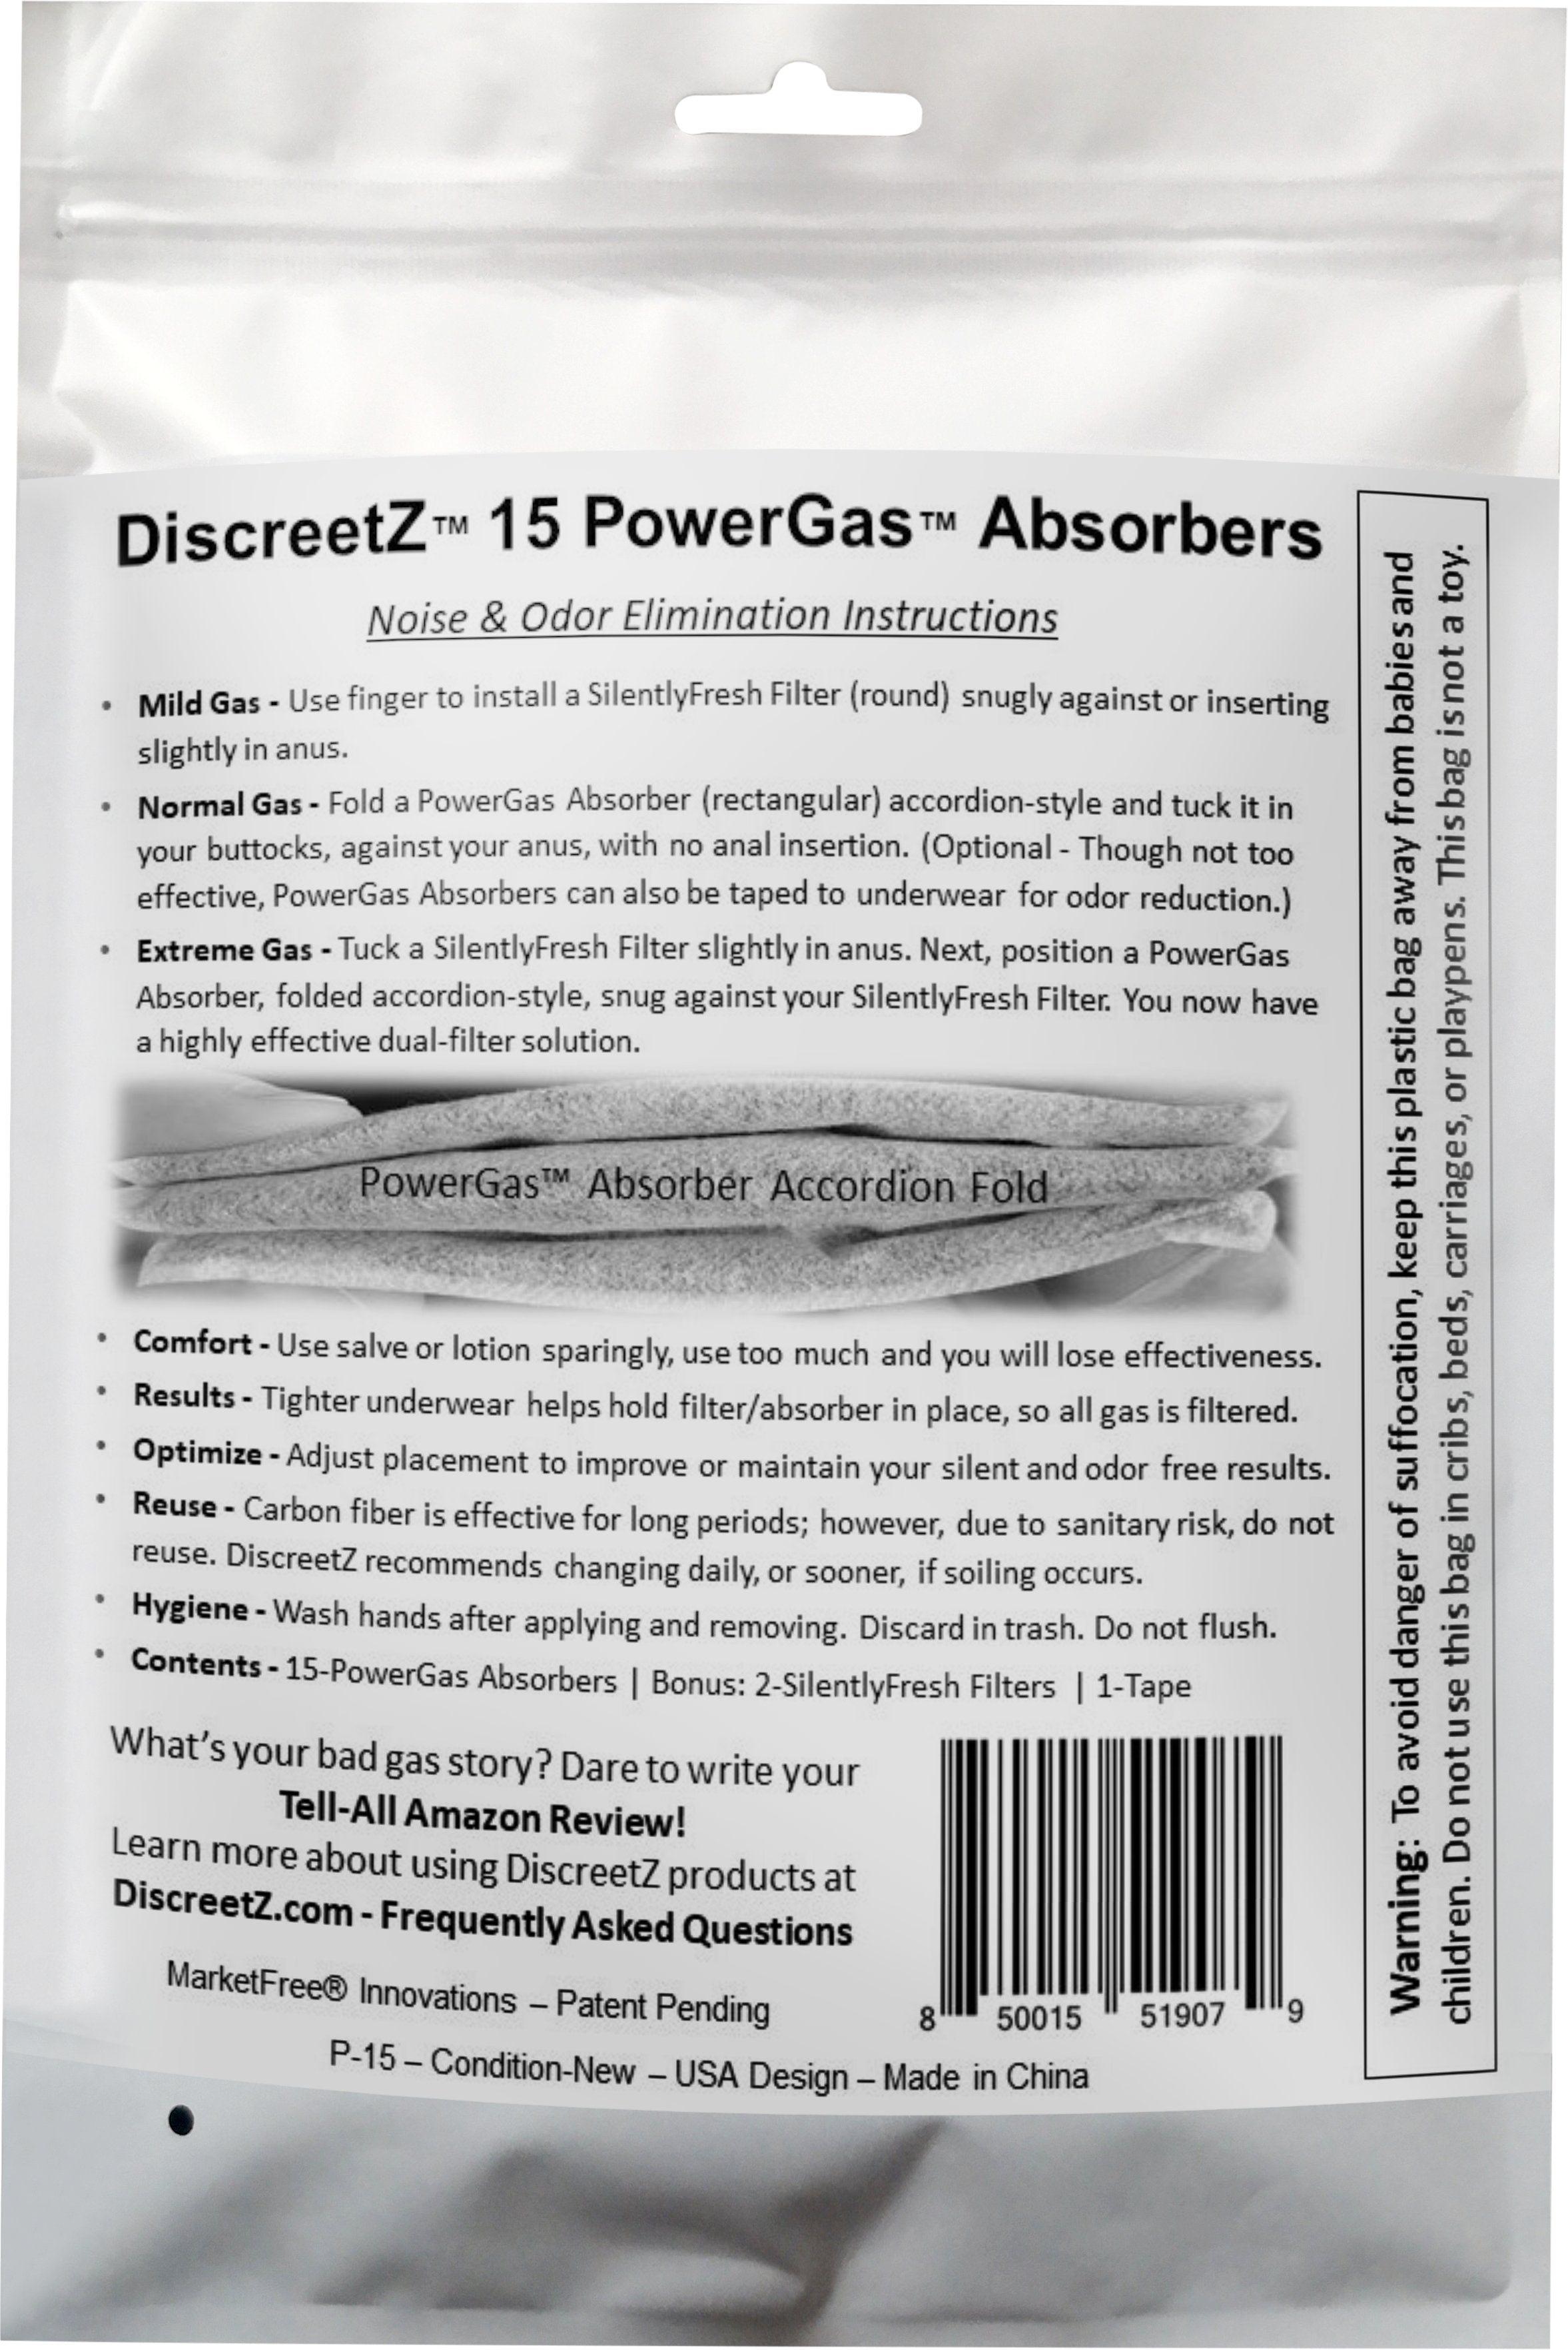 Charcoal-based Fart Odour Deodorizer Pads for people who pass gas